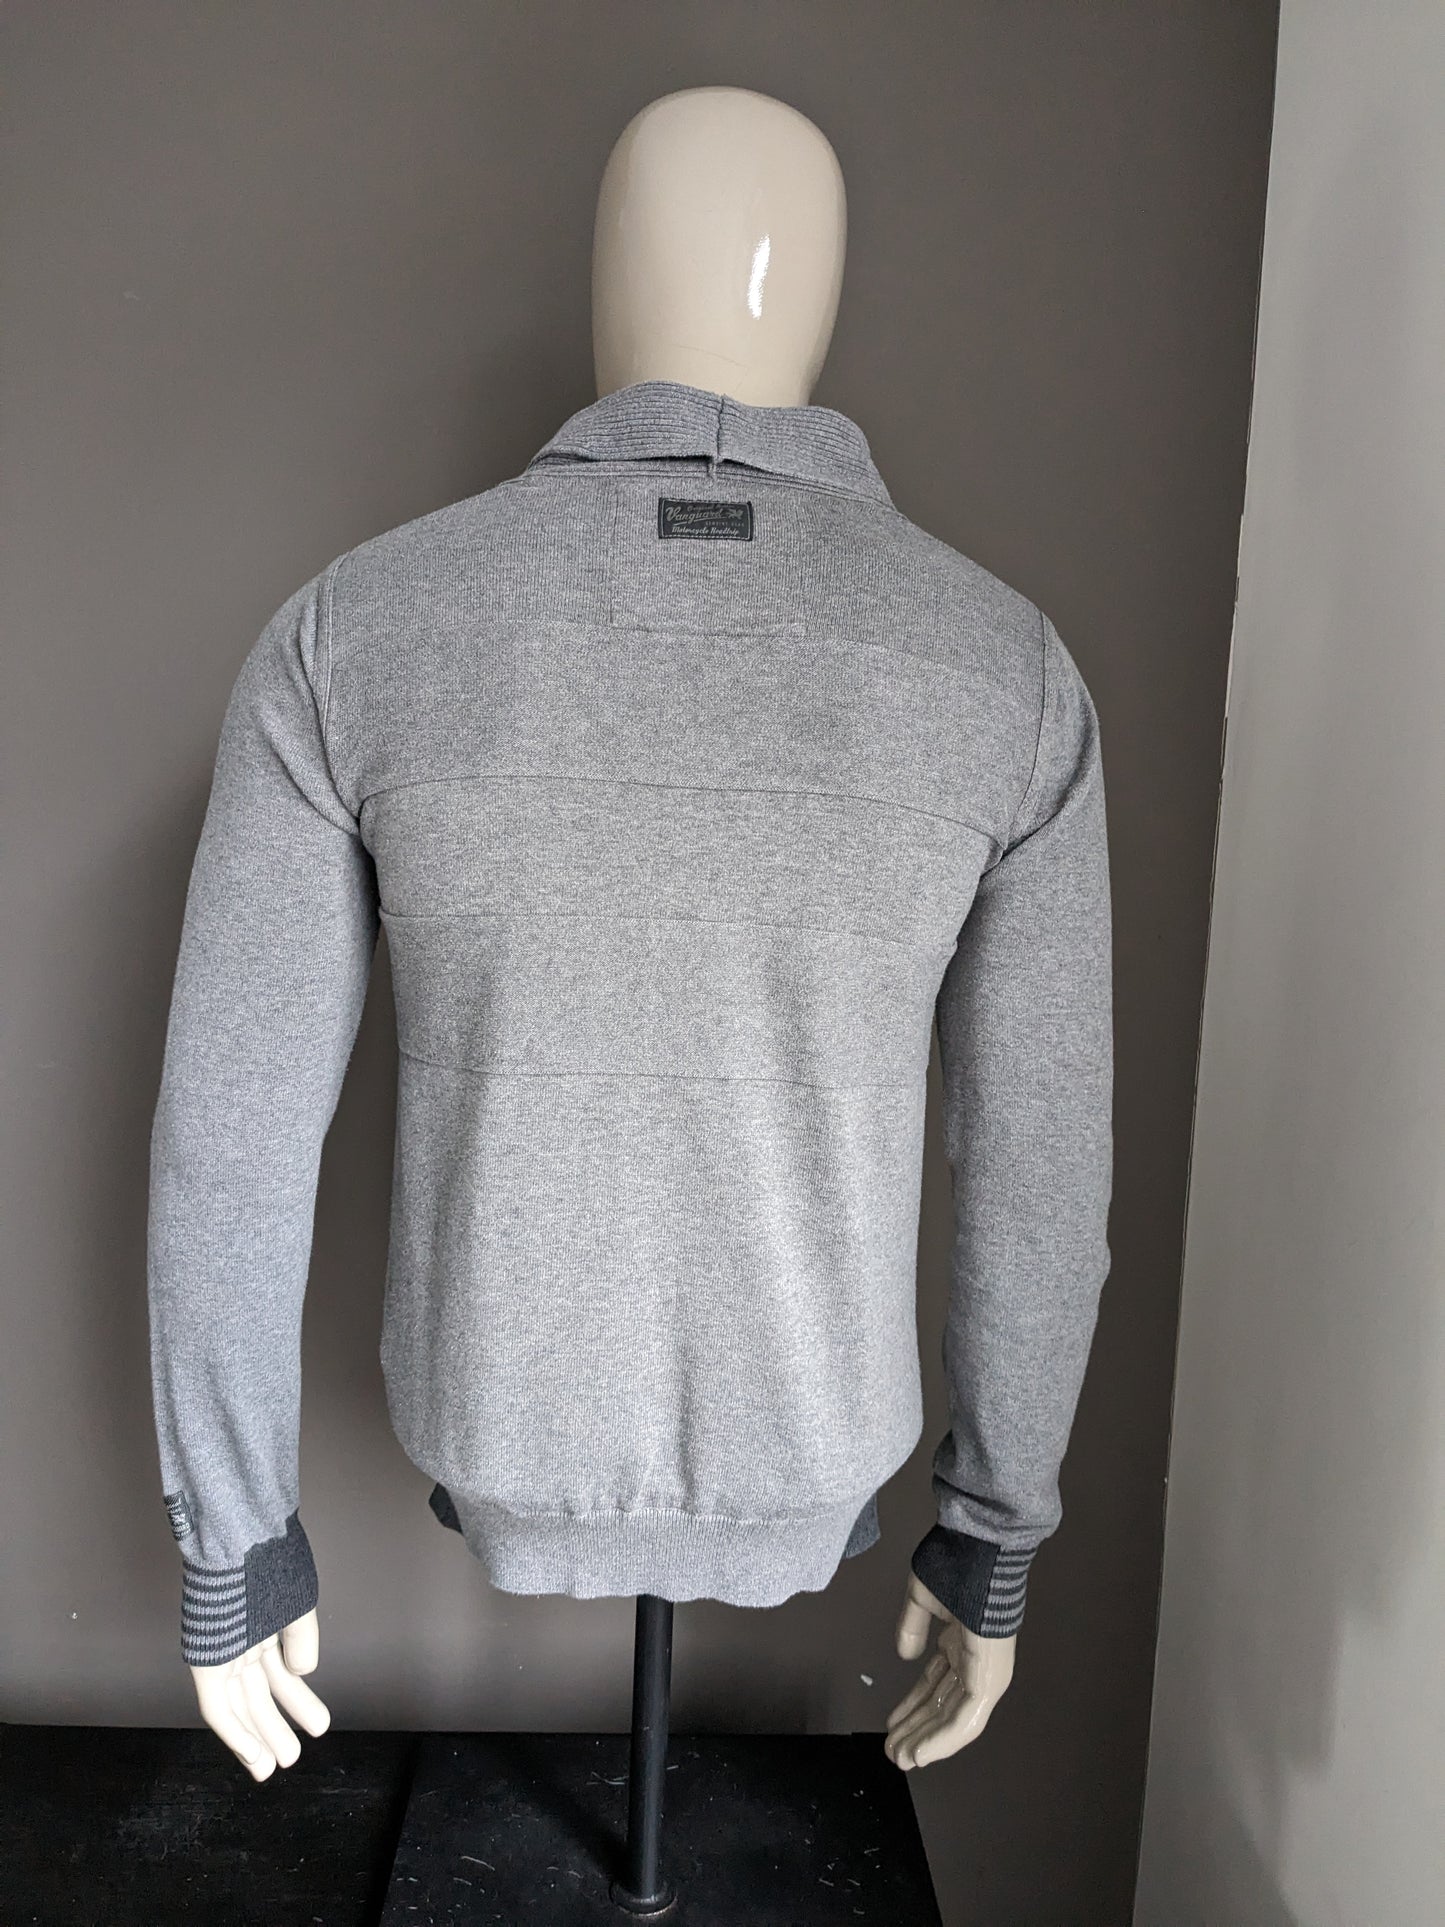 Vanguard sweater with sporty collar and buttons. Gray mixed. Size M.